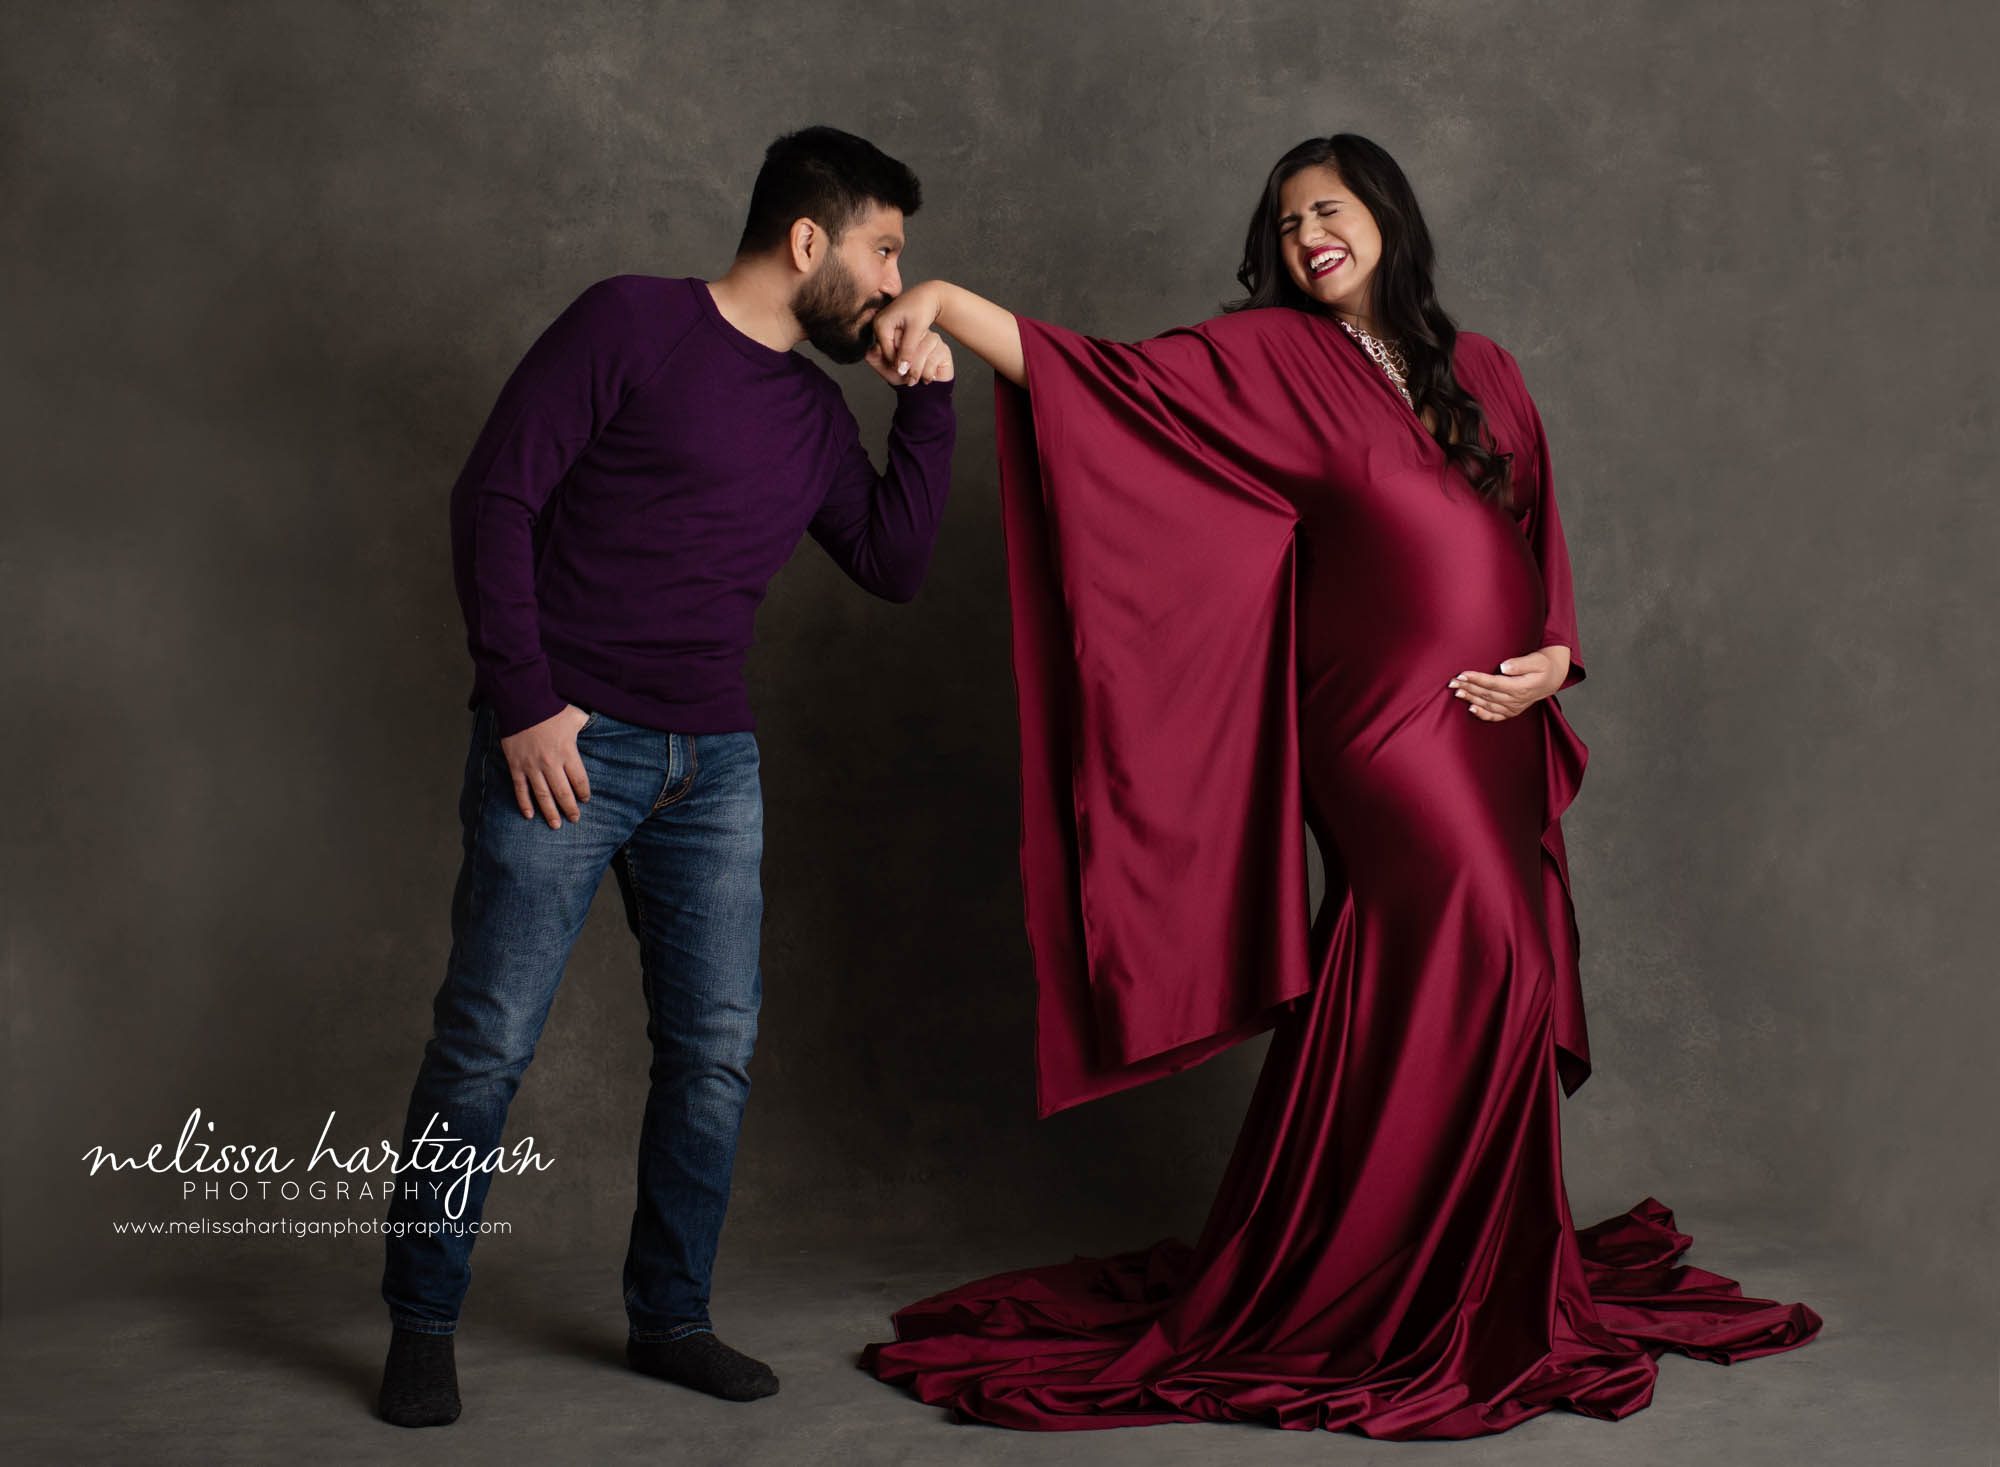 couples maternity pic dad kissing hand fun romantic maternity pose mom happy laughing beautiful pregnancy picture